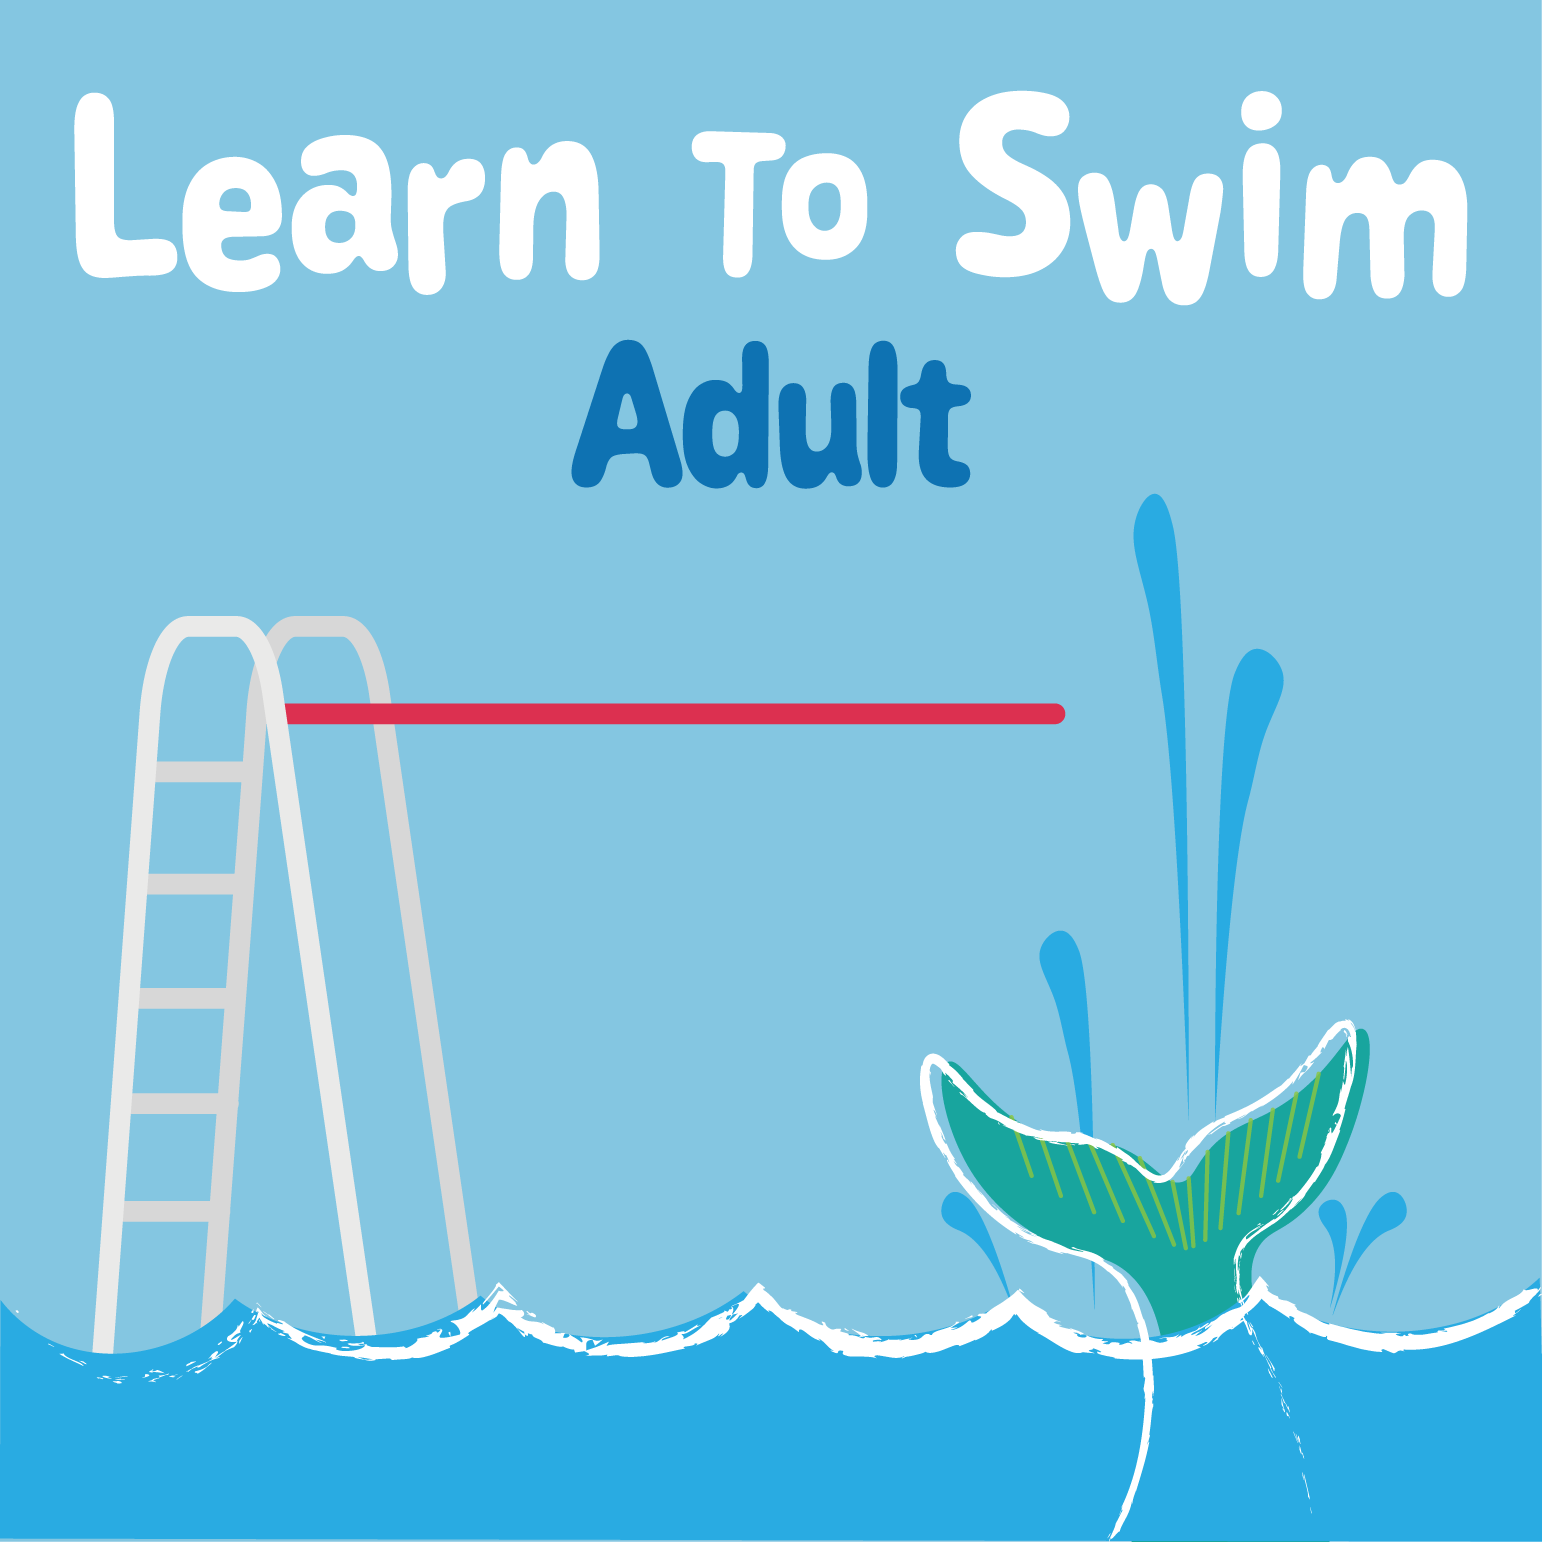 a tail sticking out of the water after jumping in with the text "learn to swim; adult"